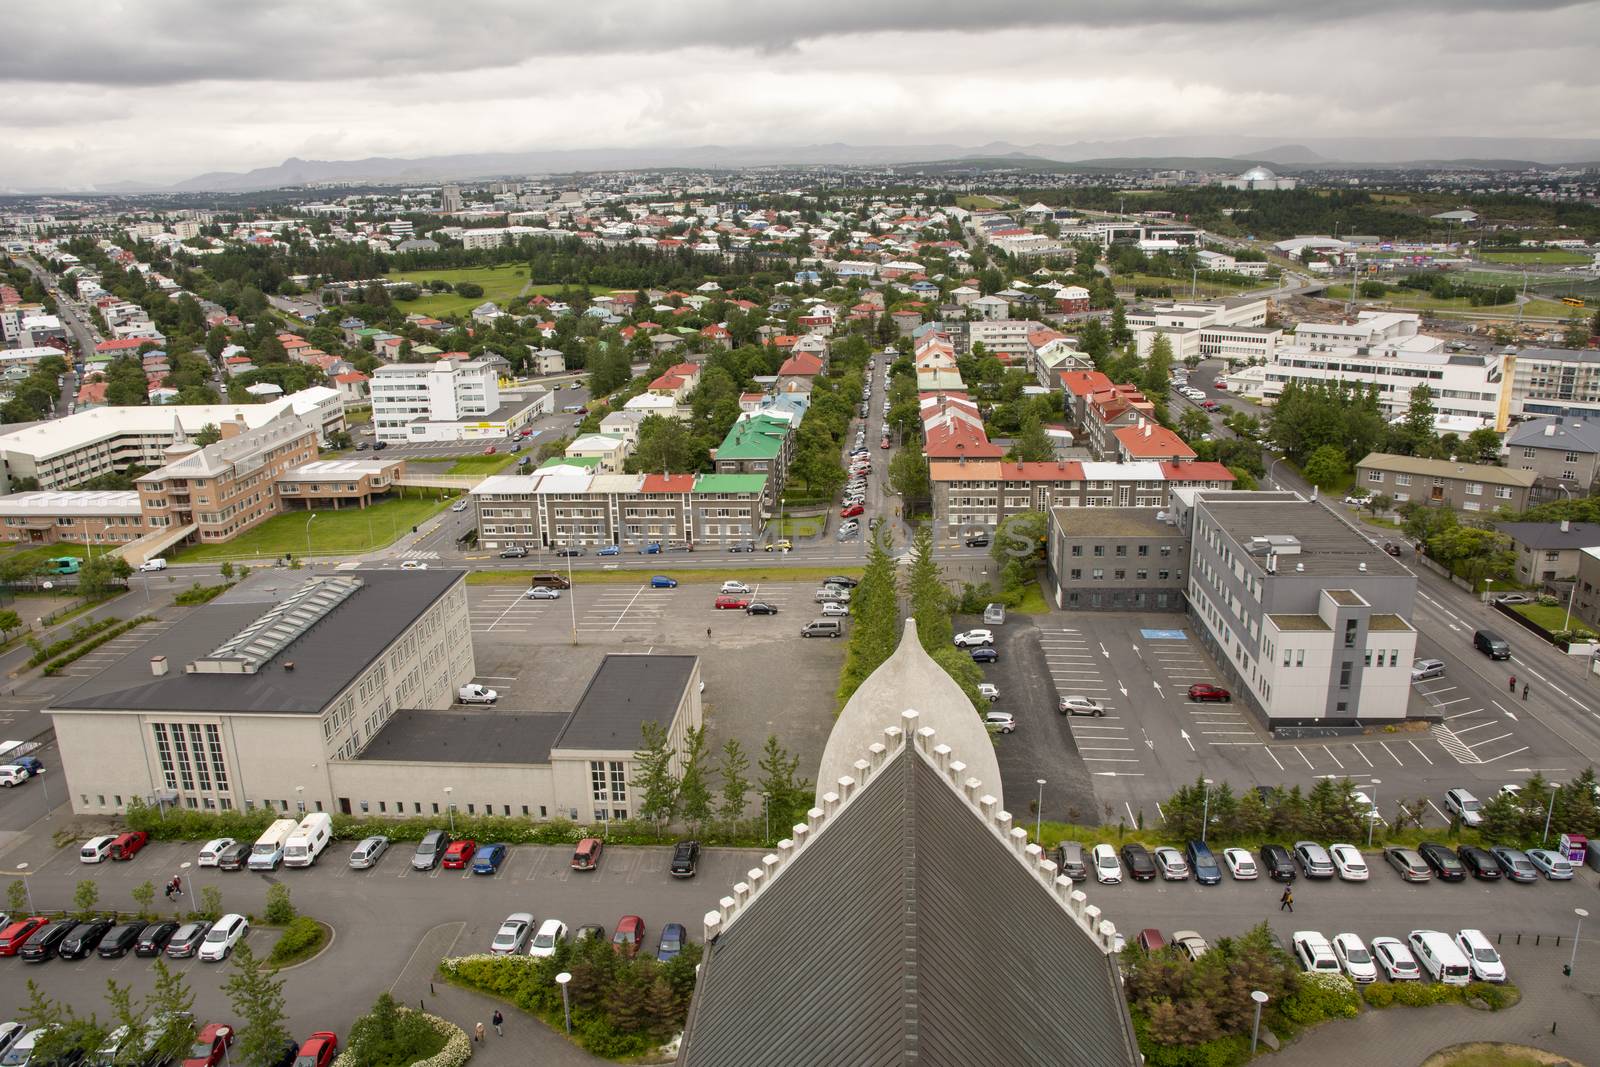 Reykjavik, Iceland, skyline and cityscape with view over houses. Aerial. by kb79